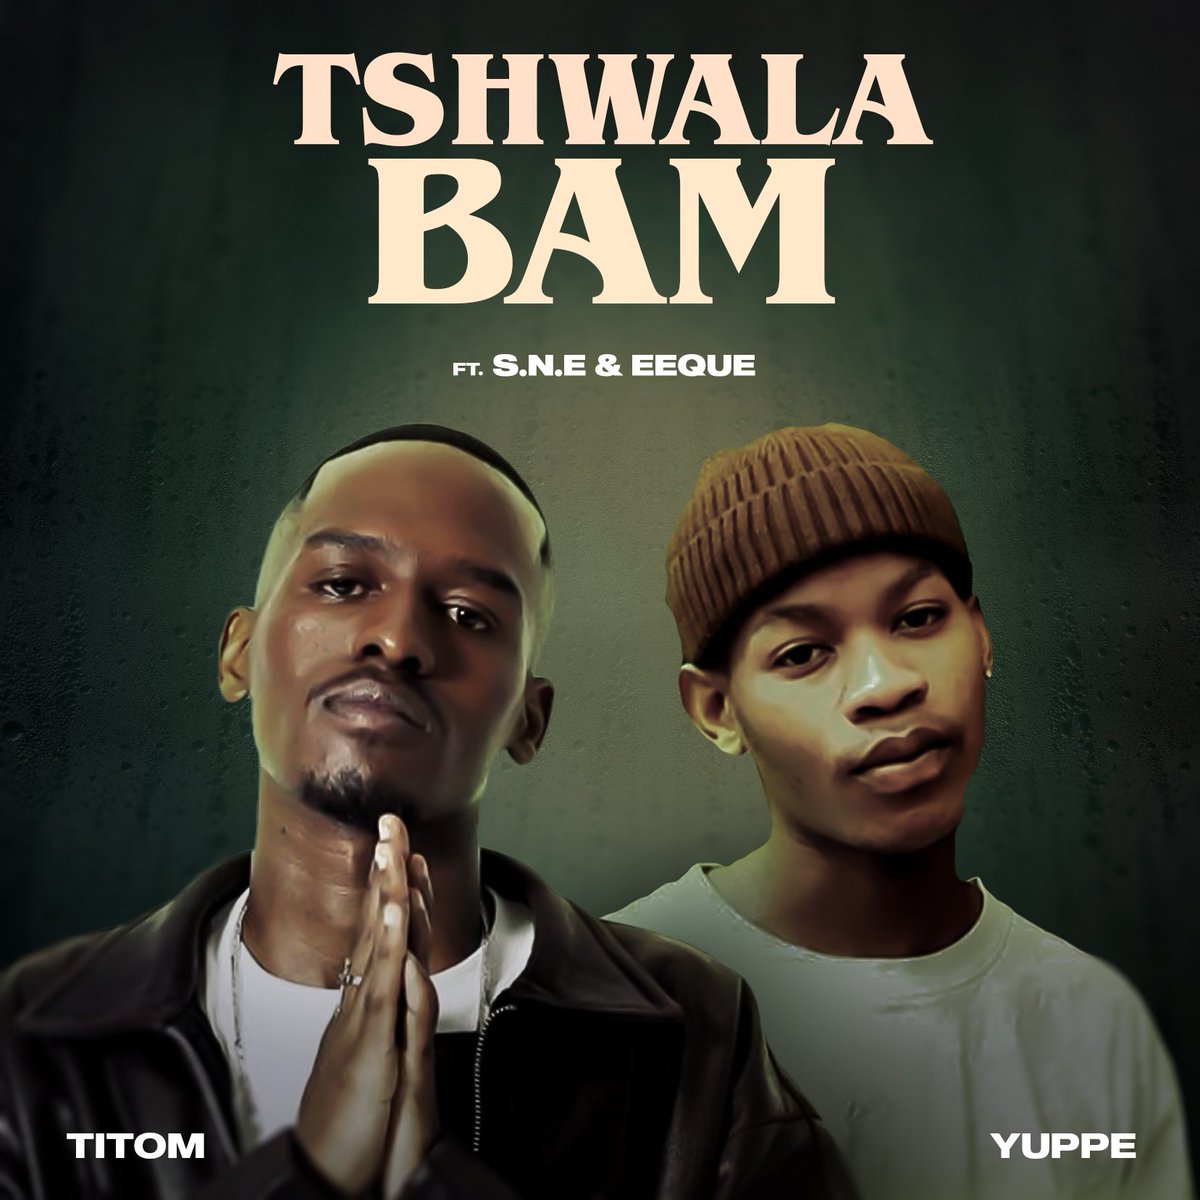 'Tshwala Bam' by TitoM & Yuppe featuring S.N.E & EeQue Has officially reached 6 Million streams on SA 🇿🇦Spotify It becomes the first song released in 2024 to do so far